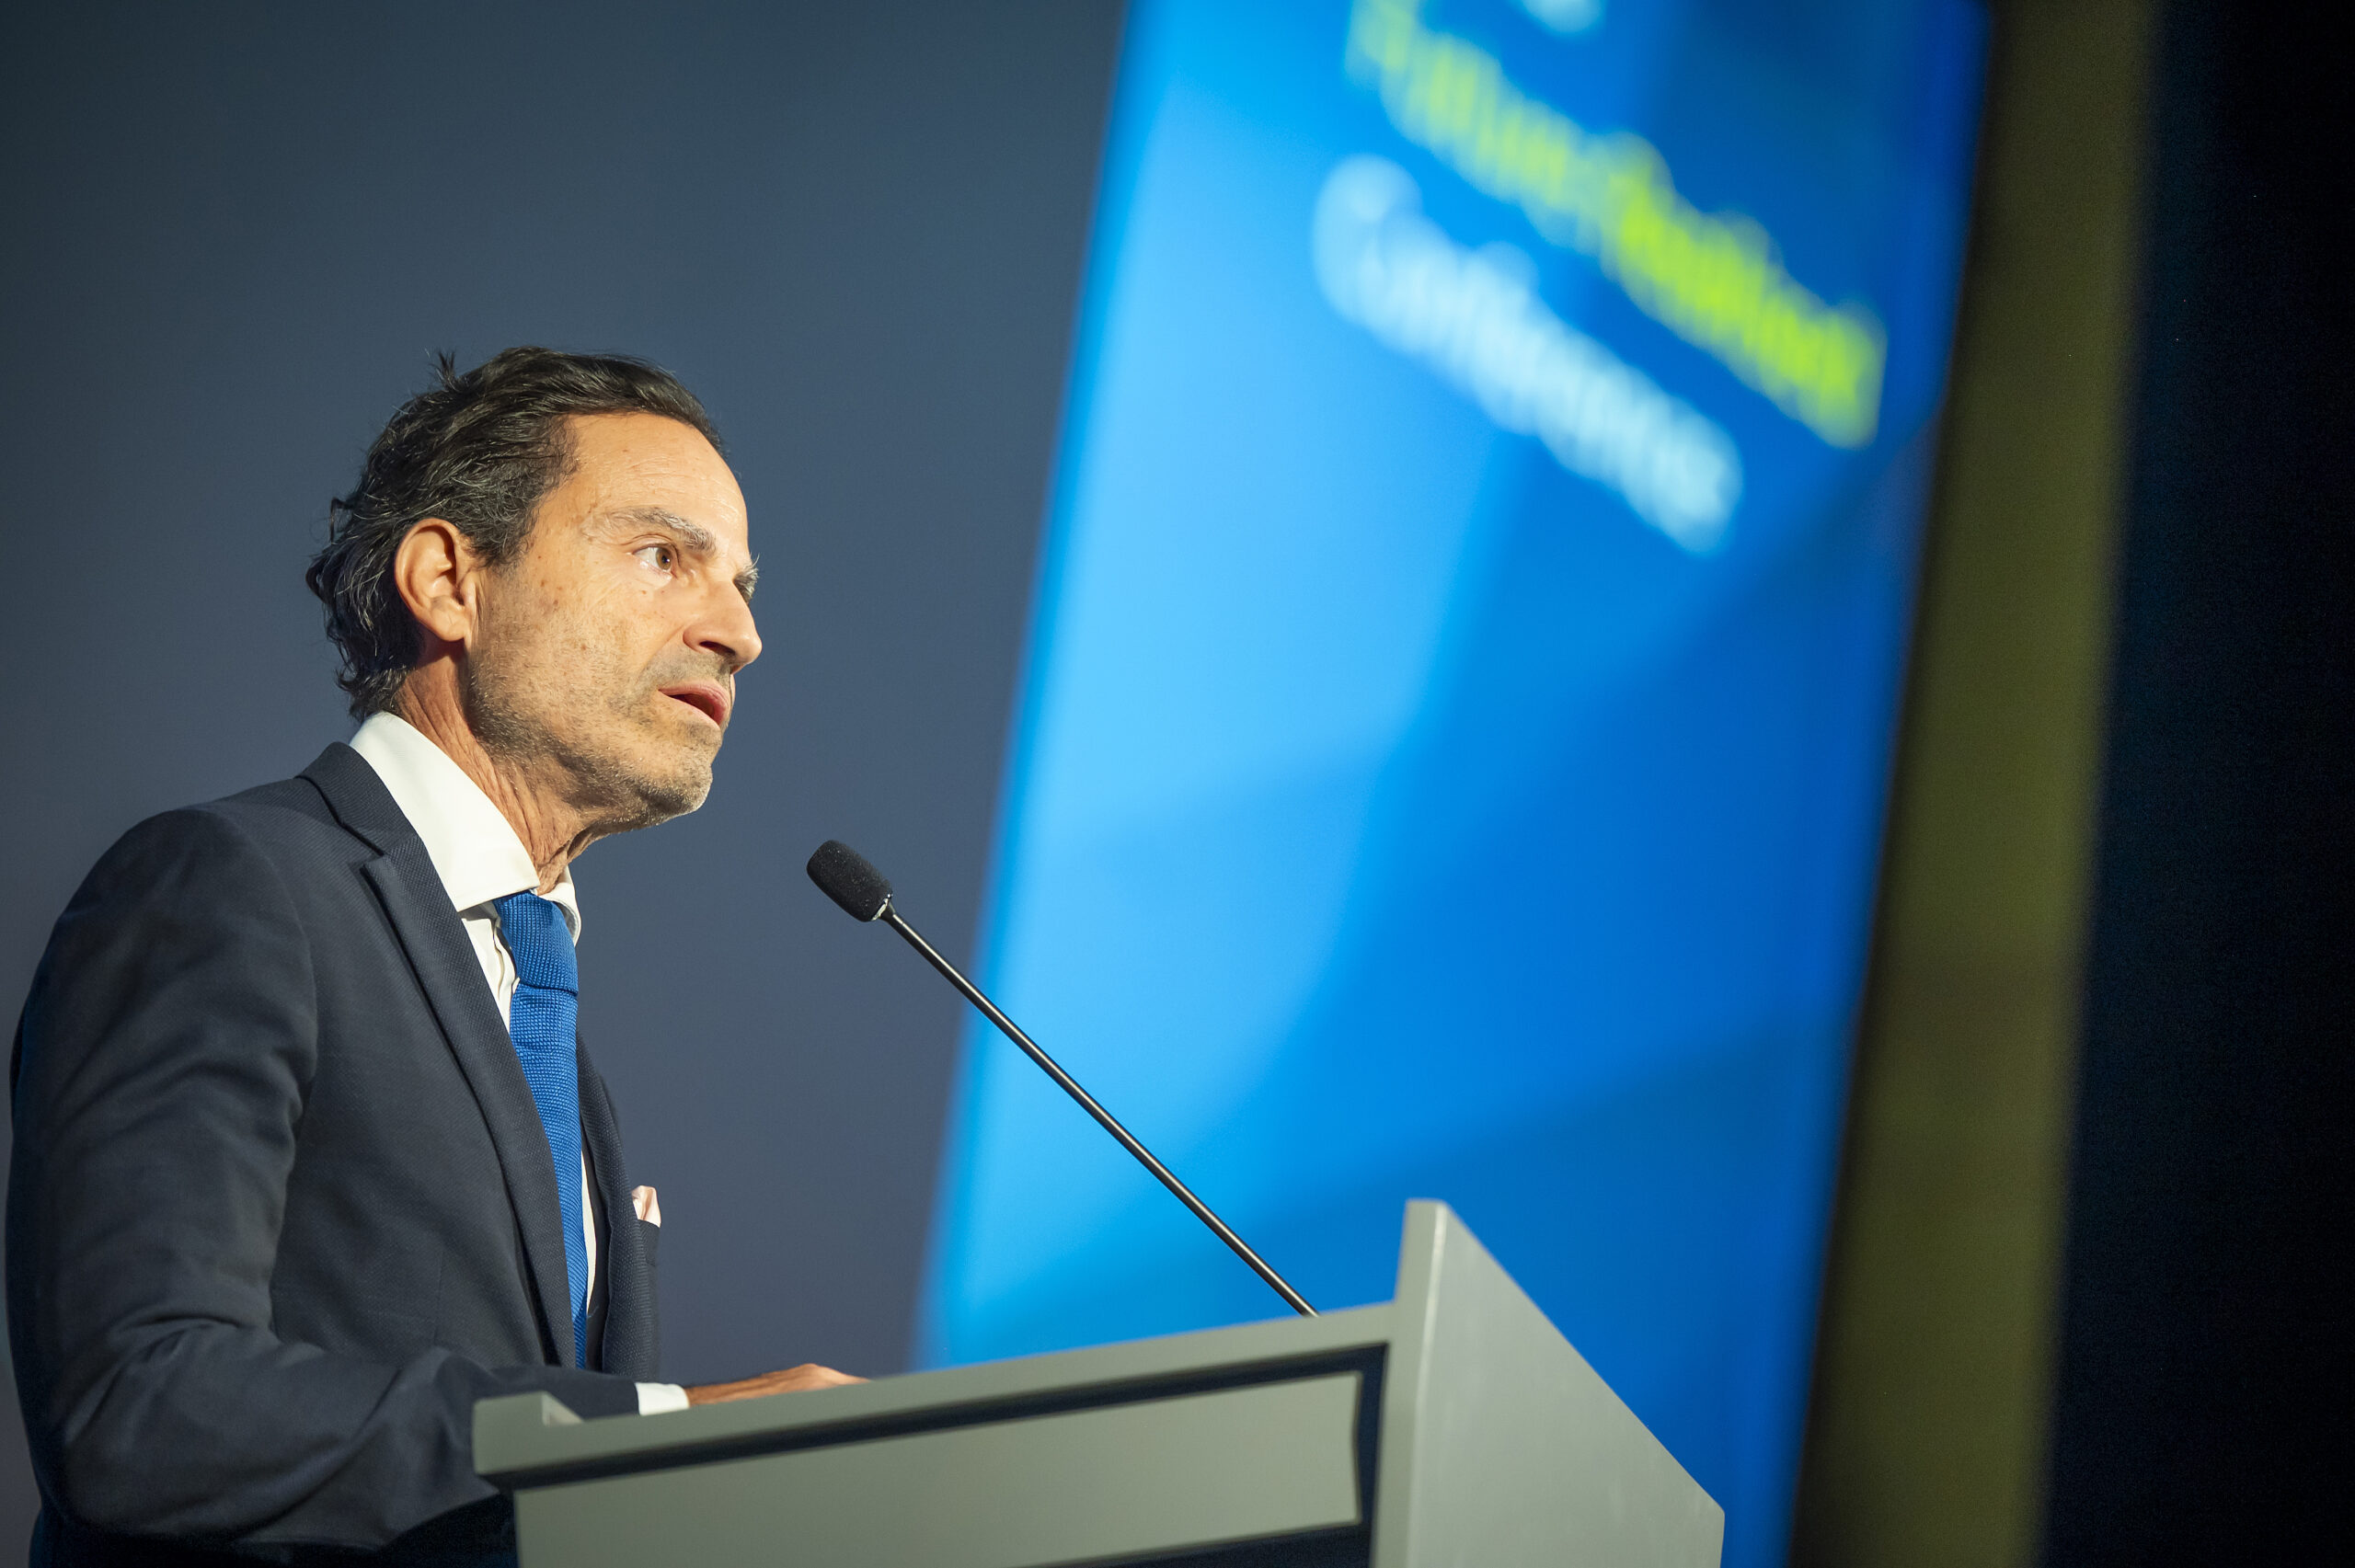 The Malta Chamber President’s address during the EY Malta Future Realised Conference